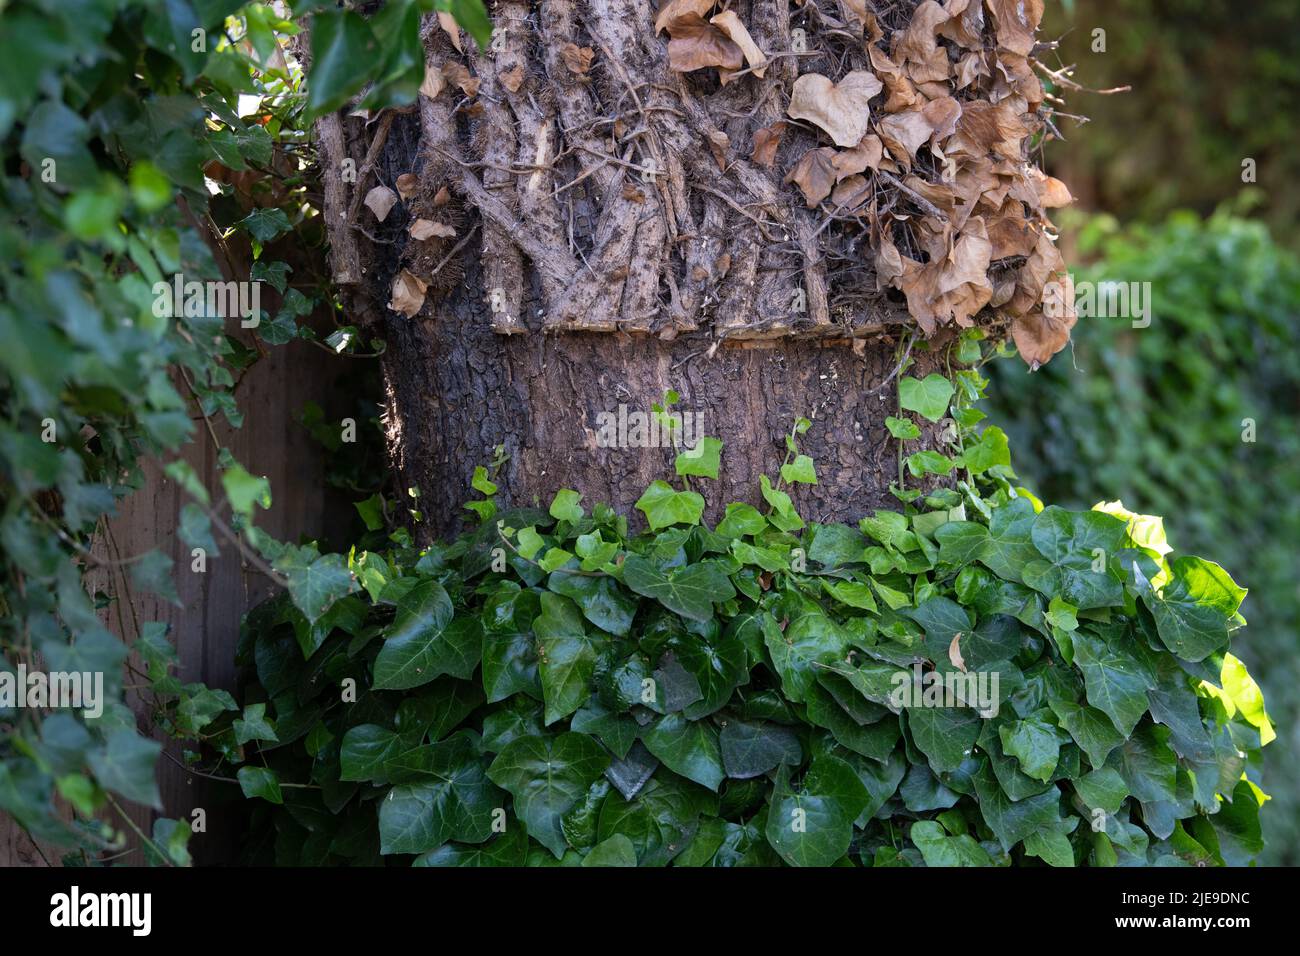 Cutting back ivy - regrowth from base climbing back up tree - UK Stock Photo